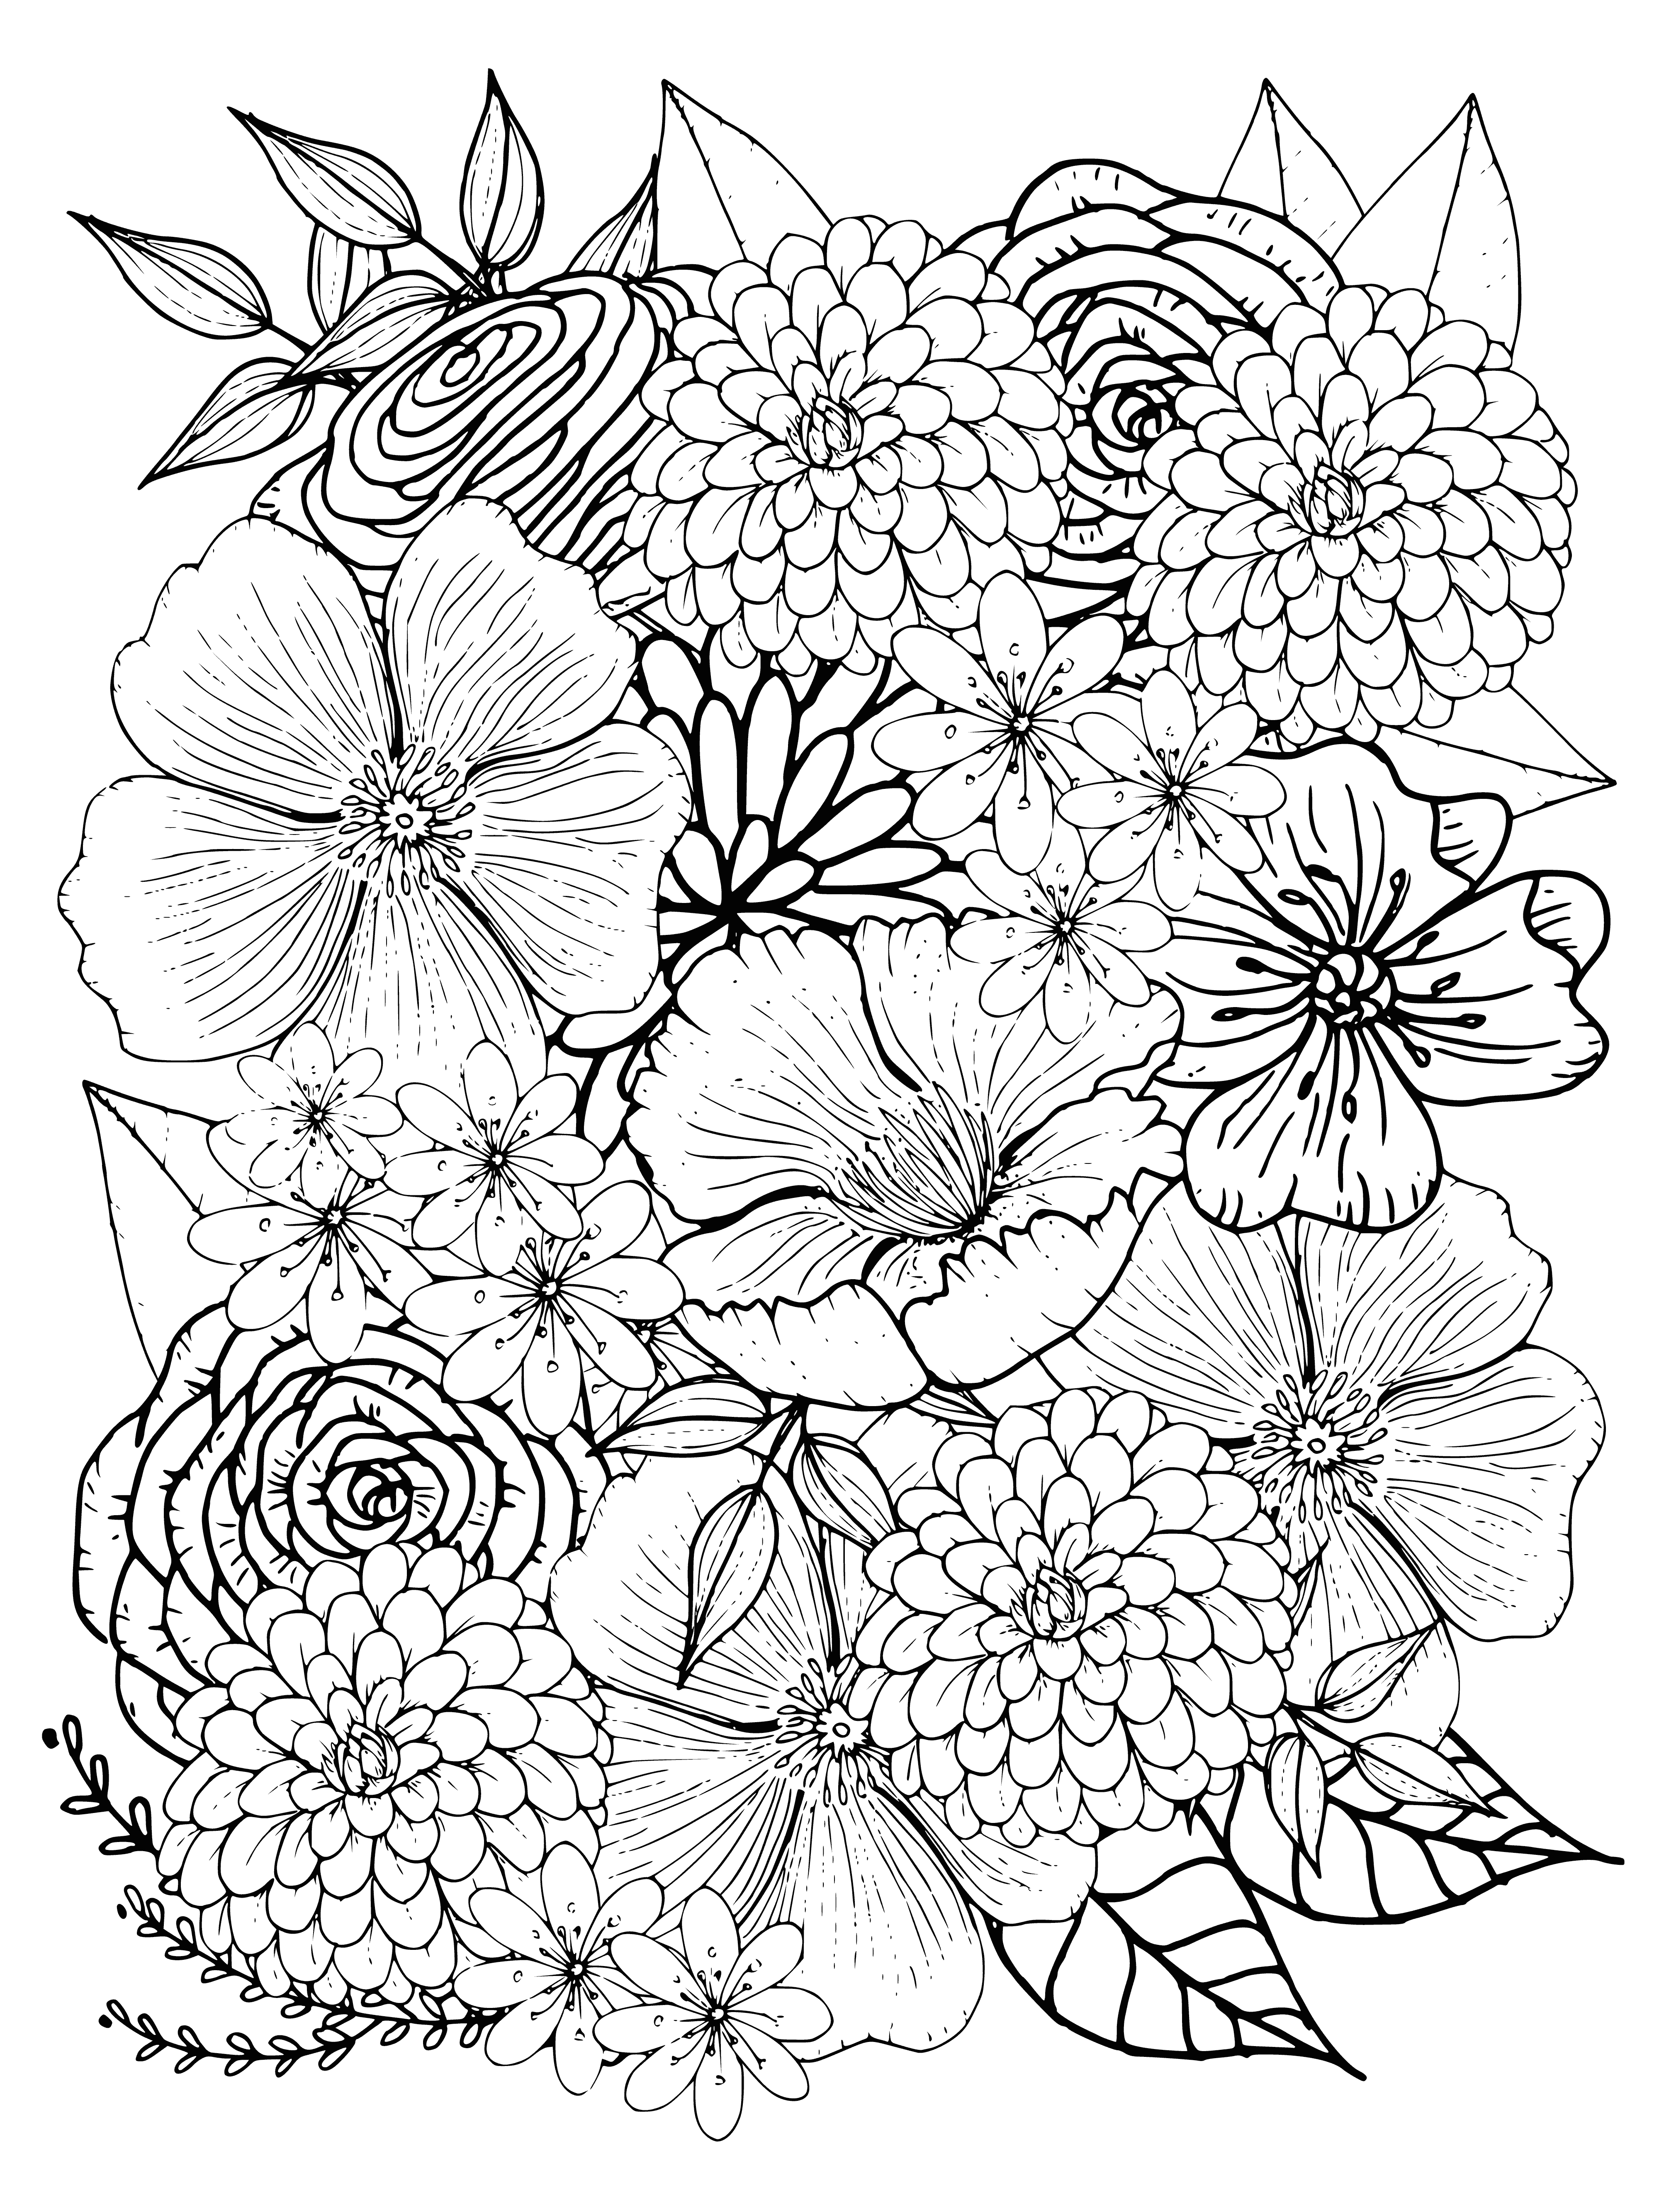 coloring page: Adult coloring book page with different flowers of various colors and patterns. #AdultColoring